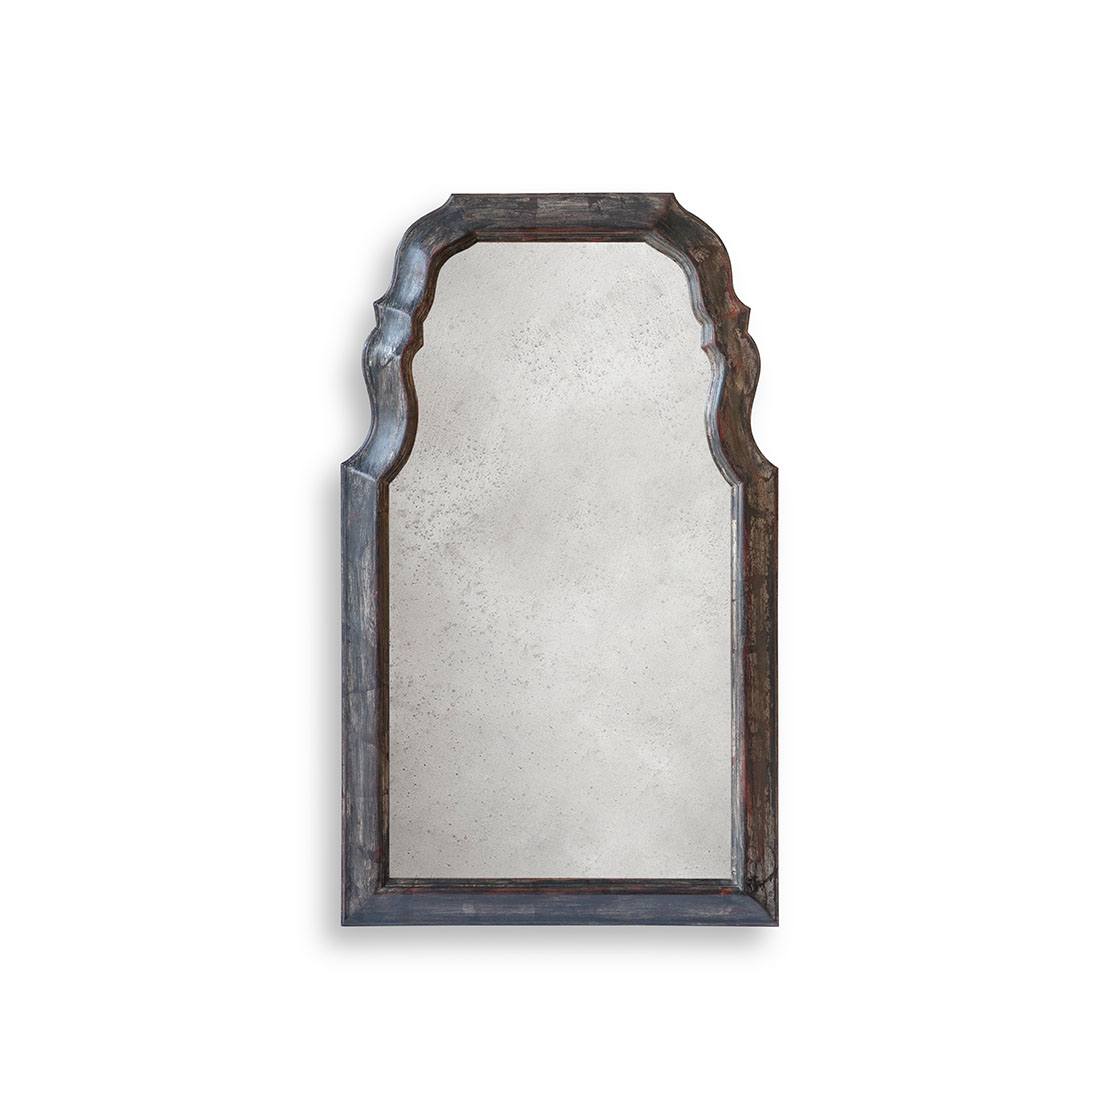 Arcus small mirror in Oxidised real silver - Beaumont & Fletcher